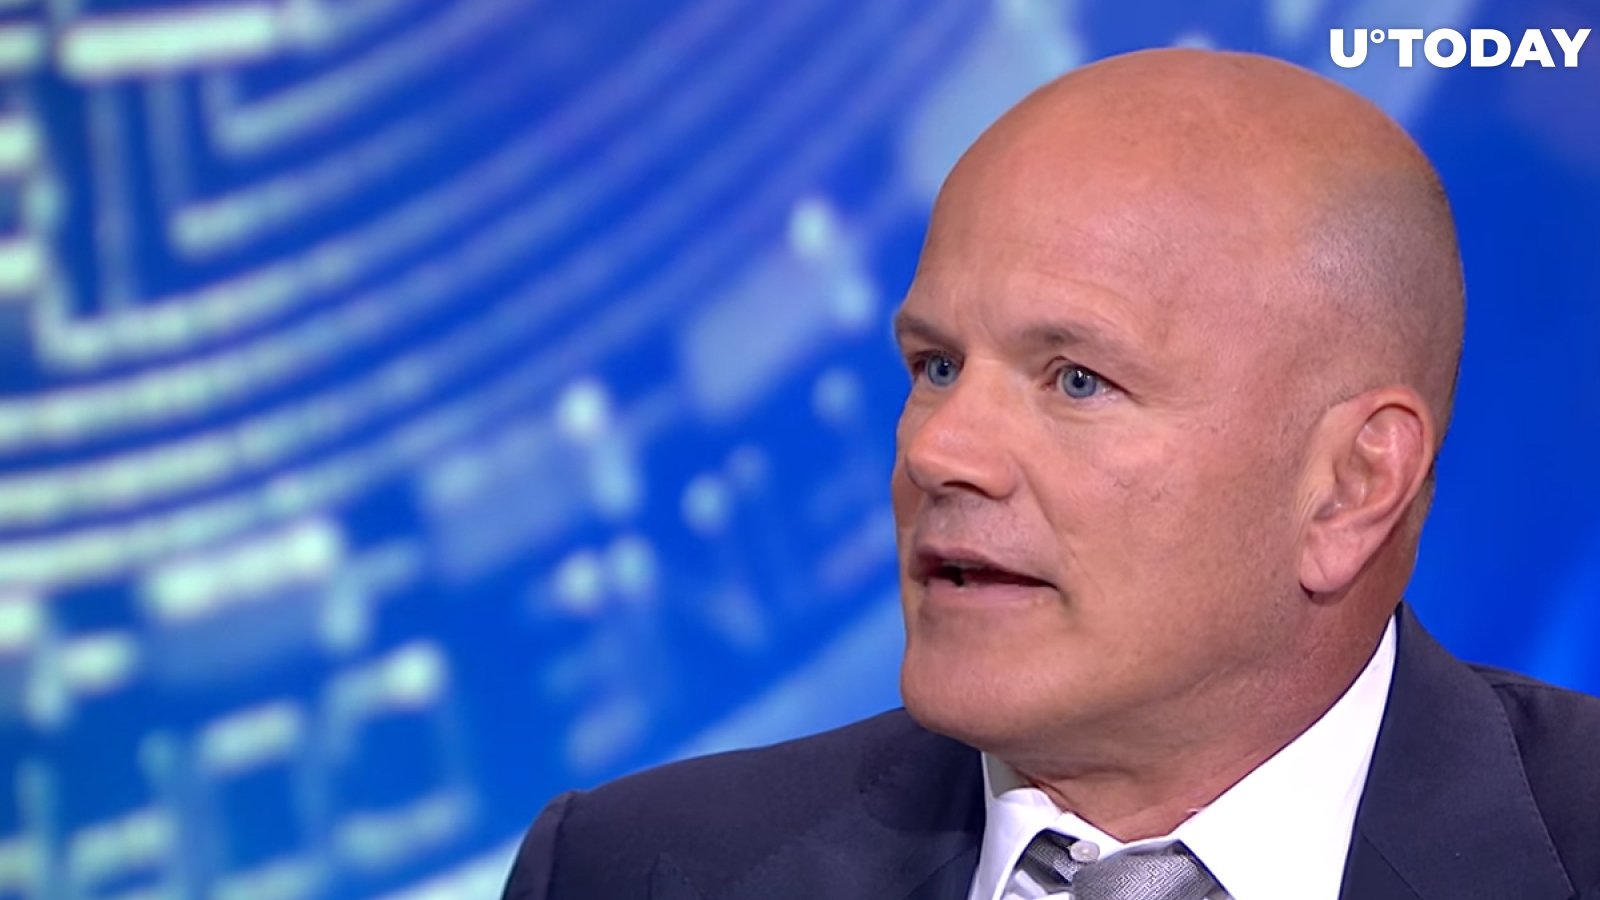 Mike Novogratz Predicts That Bitcoin Will Match Gold's Market Cap in a Few Years